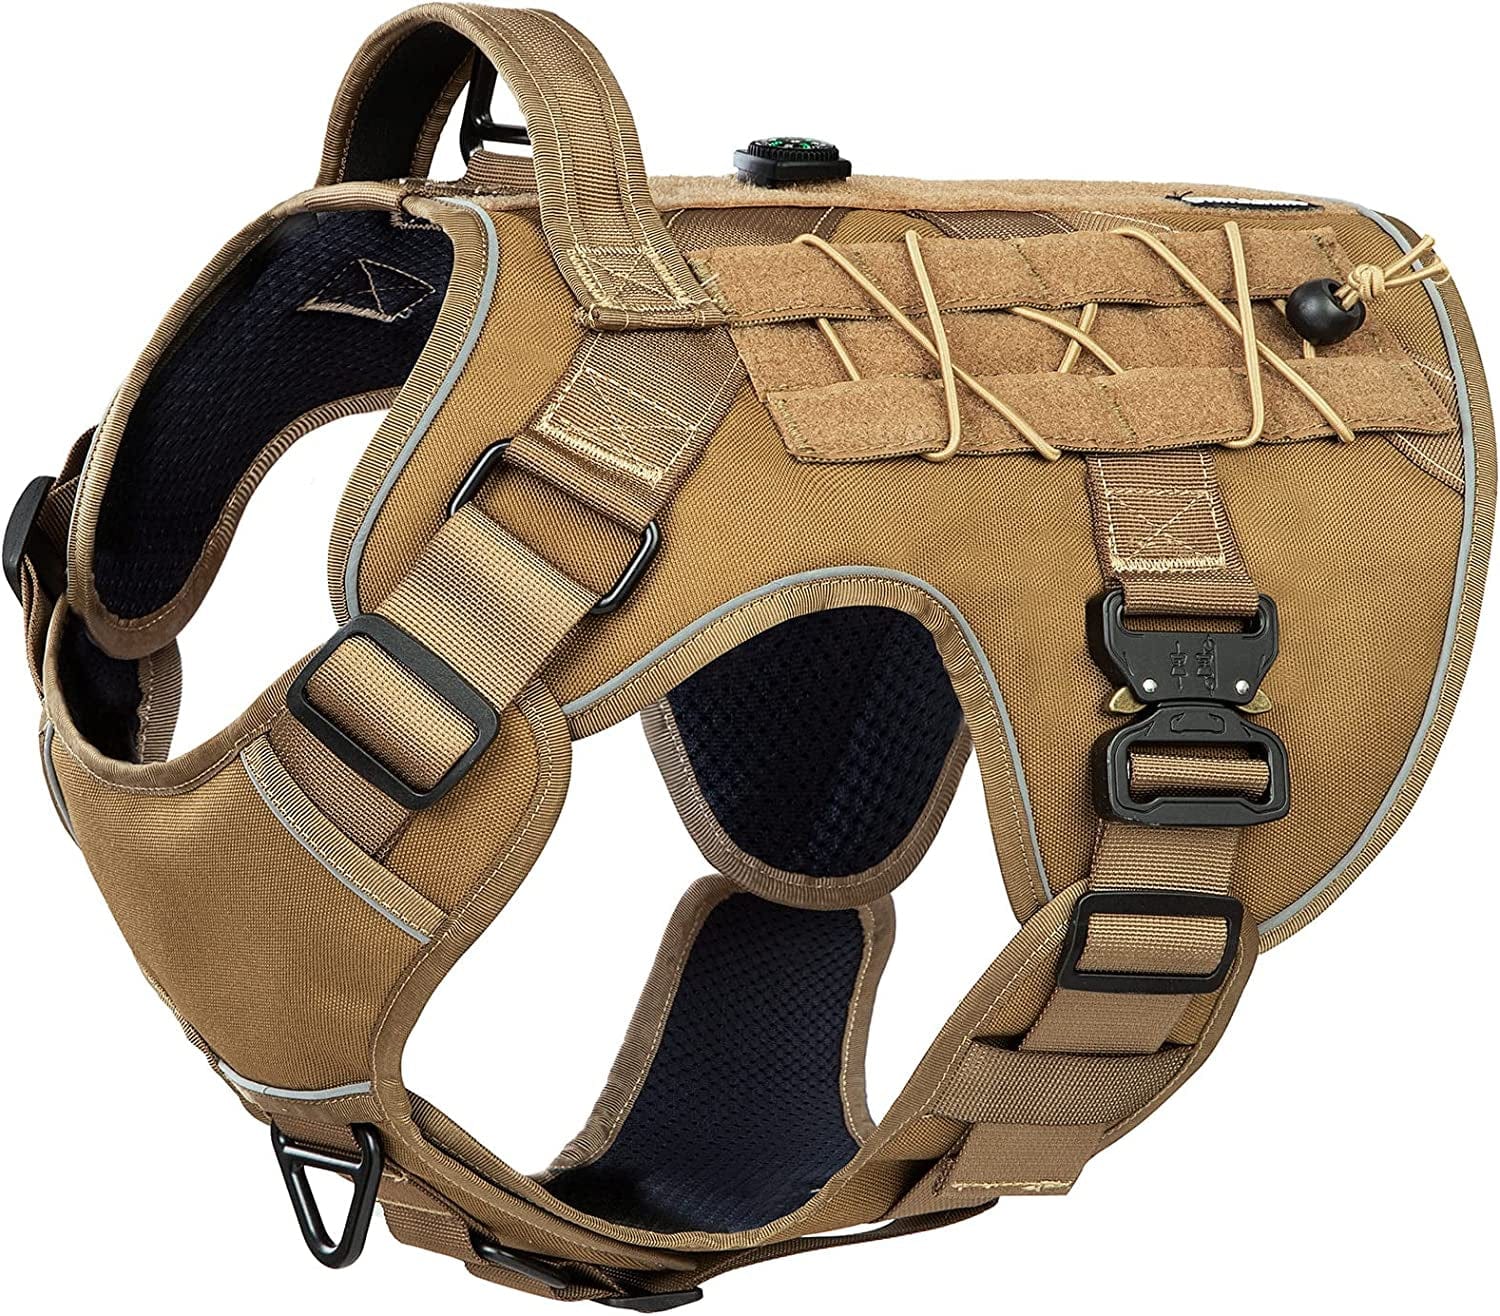 DNALLRINO Tactical Dog Harness for Large Medium Dogs, Heavy Duty Military Dog Harness with Handle, Adjustable No Pull Service Dog Harness with Molle & Loop Panels for Hiking Walking Training Animals & Pet Supplies > Pet Supplies > Dog Supplies > Dog Apparel Dnallrino A Coyote Brown L (Neck: 19" - 27", Chest: 28.5"-37") 